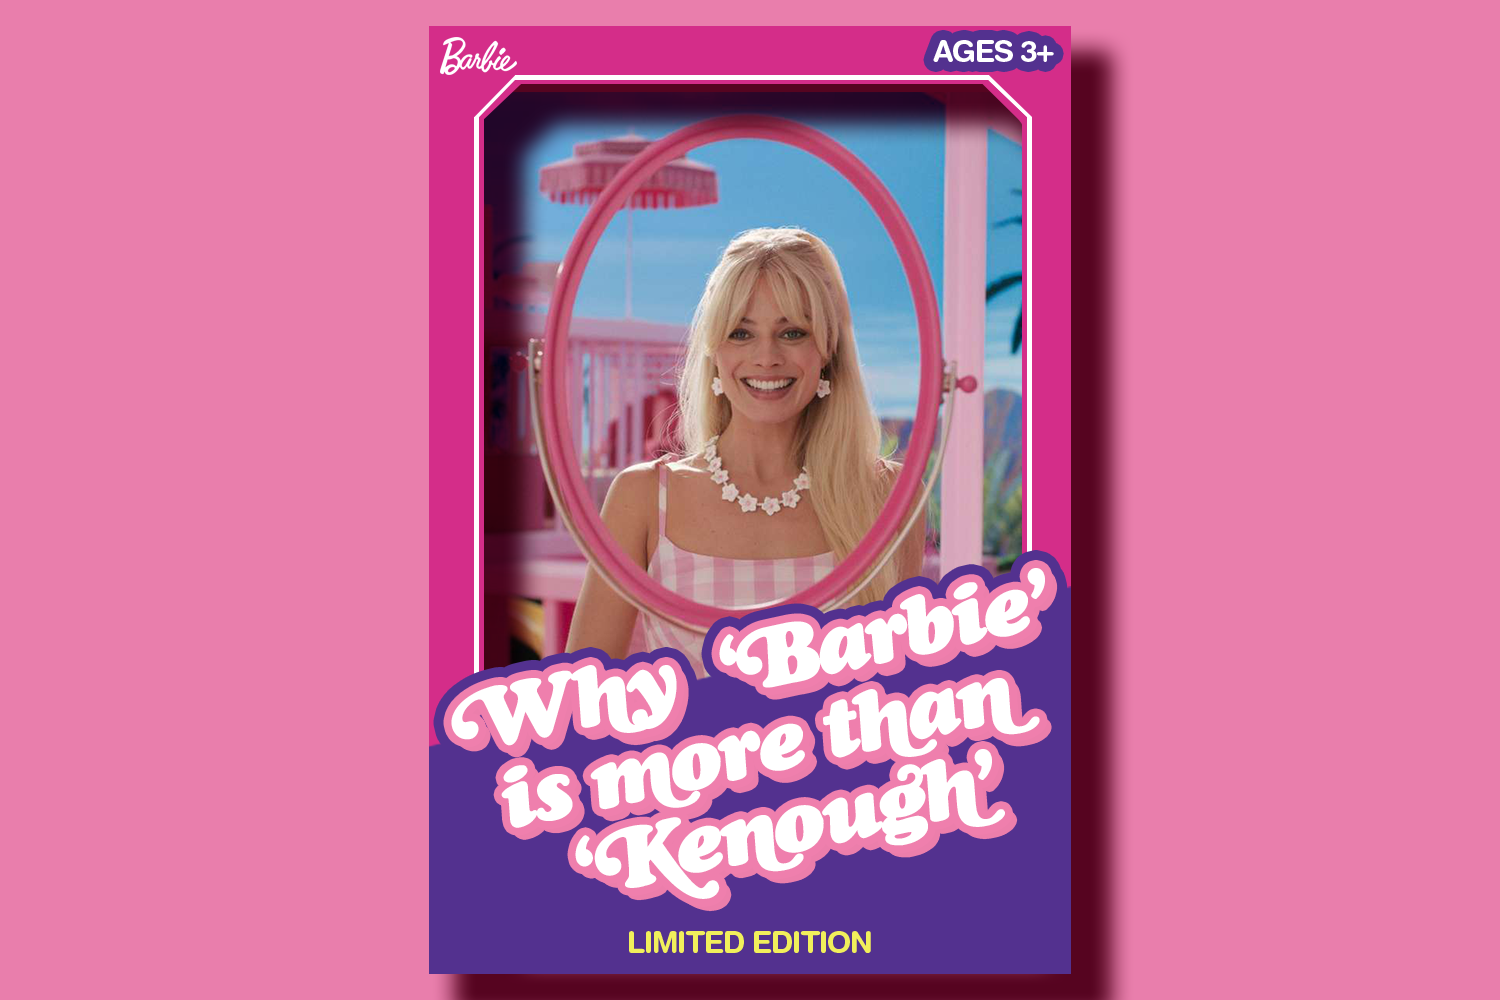 Abby Ruebush takes a look at why Barbie will have a legacy that lasts beyond the films record breaking box office performance.
Photo Illustration: Brad Bovenkerk
Promotional Images // Warner Bros. Pictures 